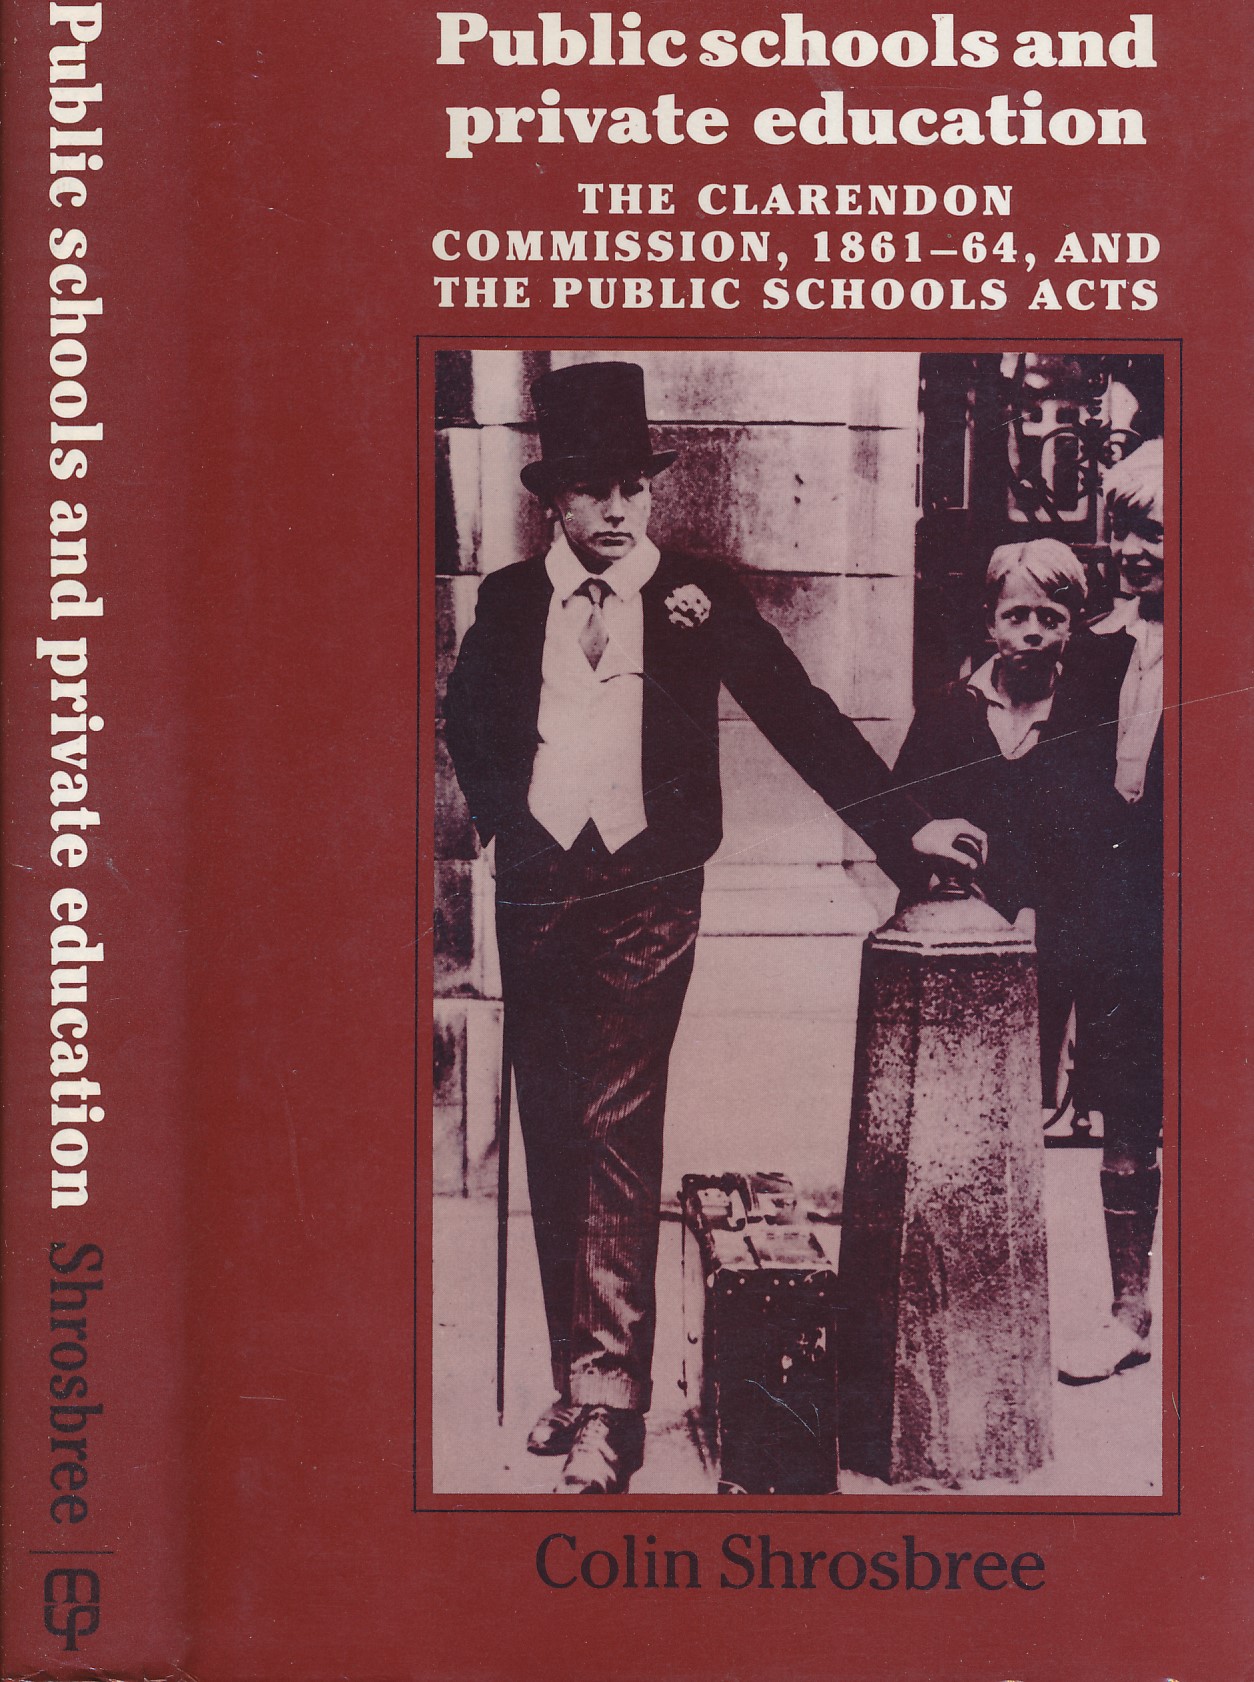 Public Schools and Private Education. The Clarendon Commission 1861-64 and the Public School Acts